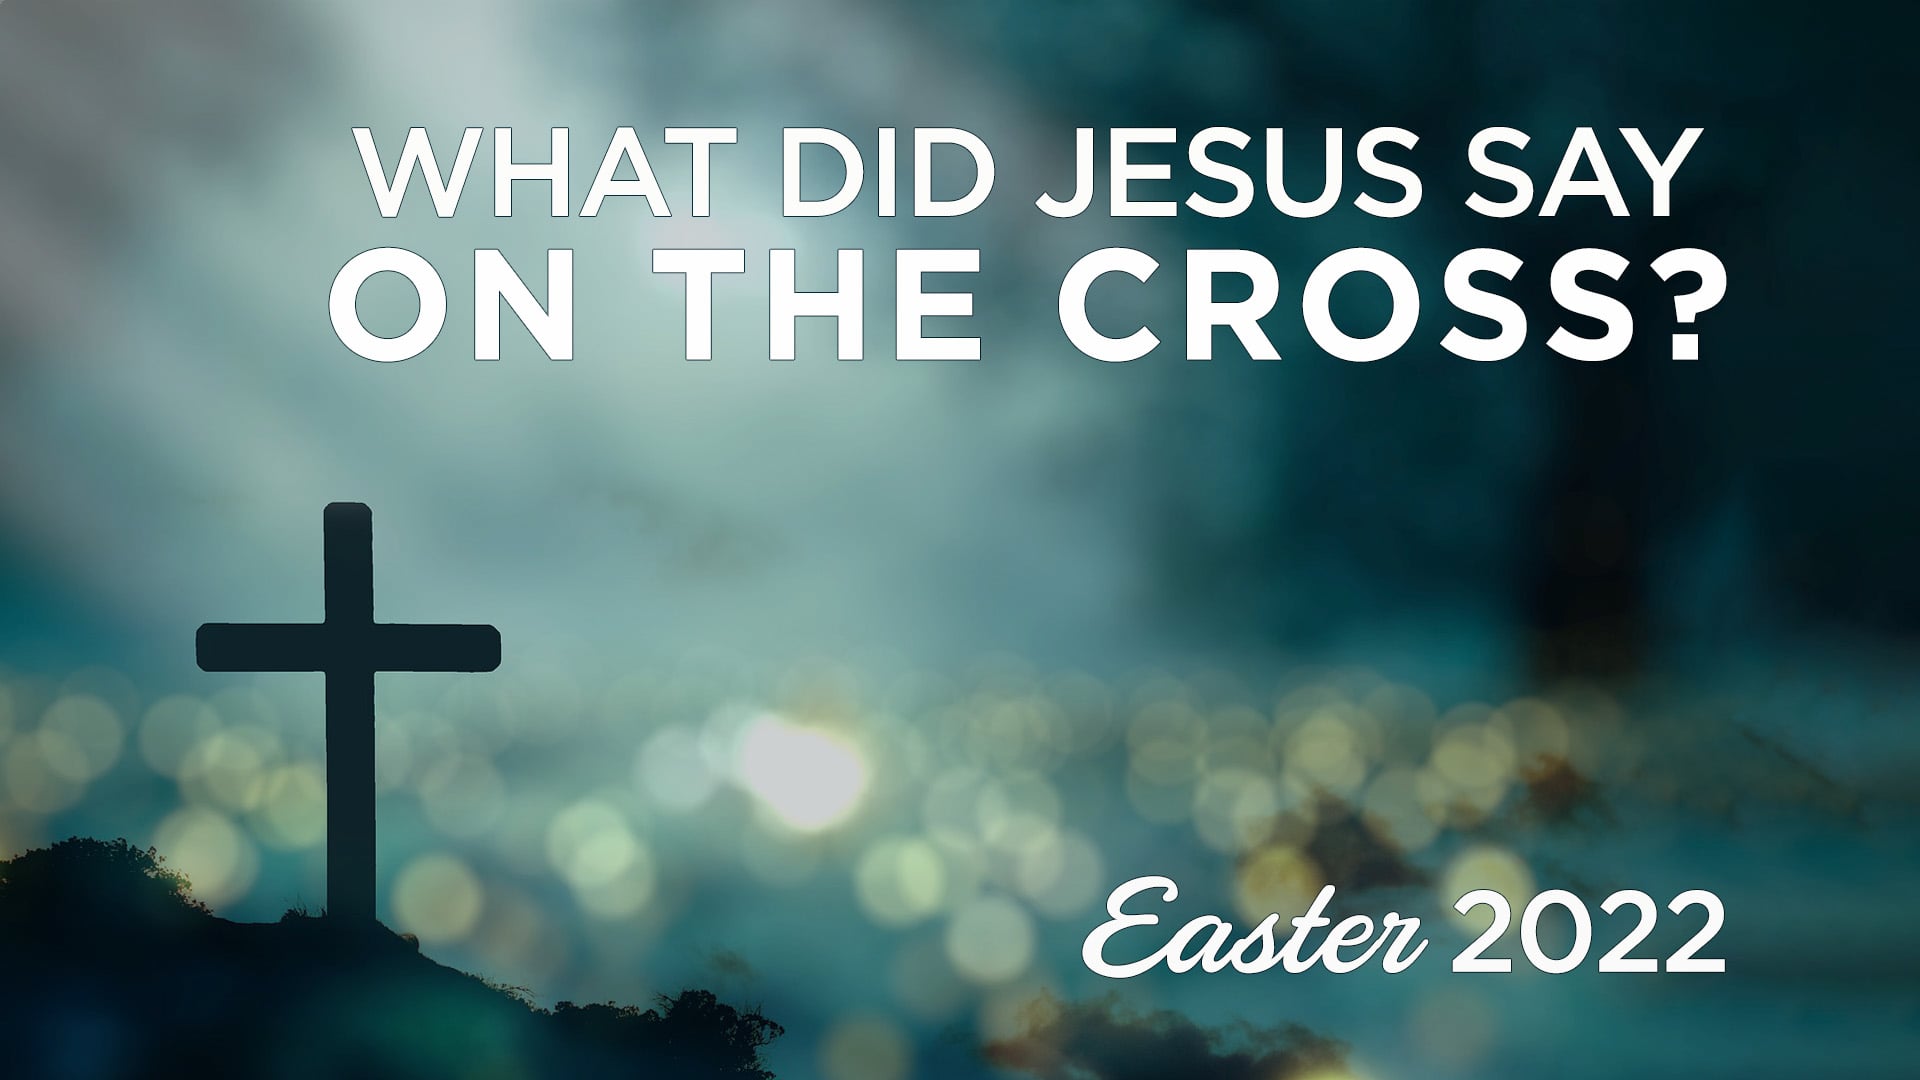 What did Jesus say on the cross?